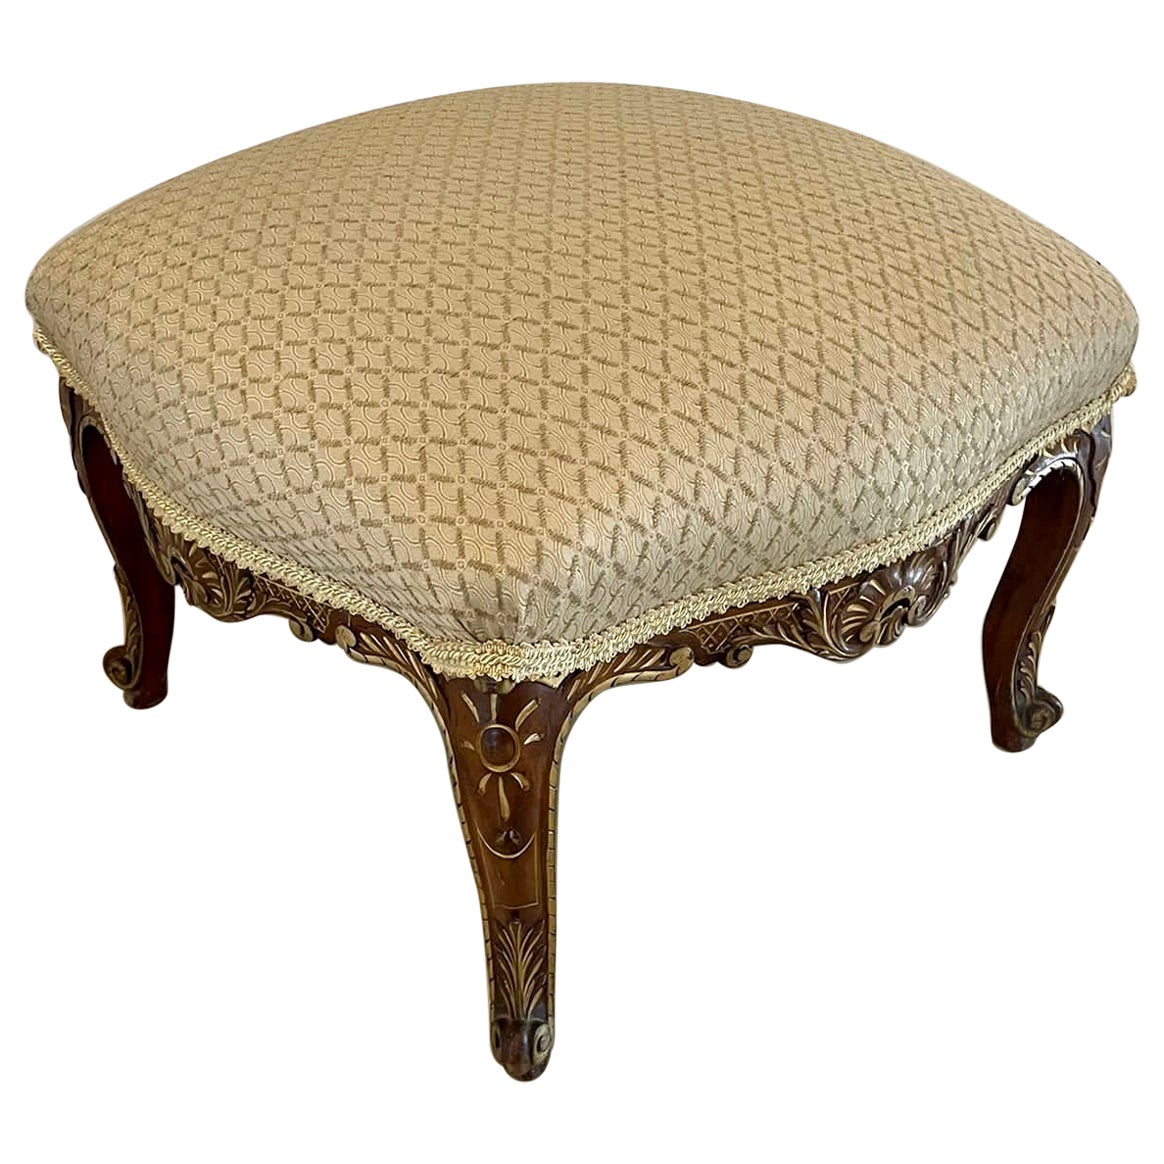 Antique Victorian Carved Walnut and Gilt Stool